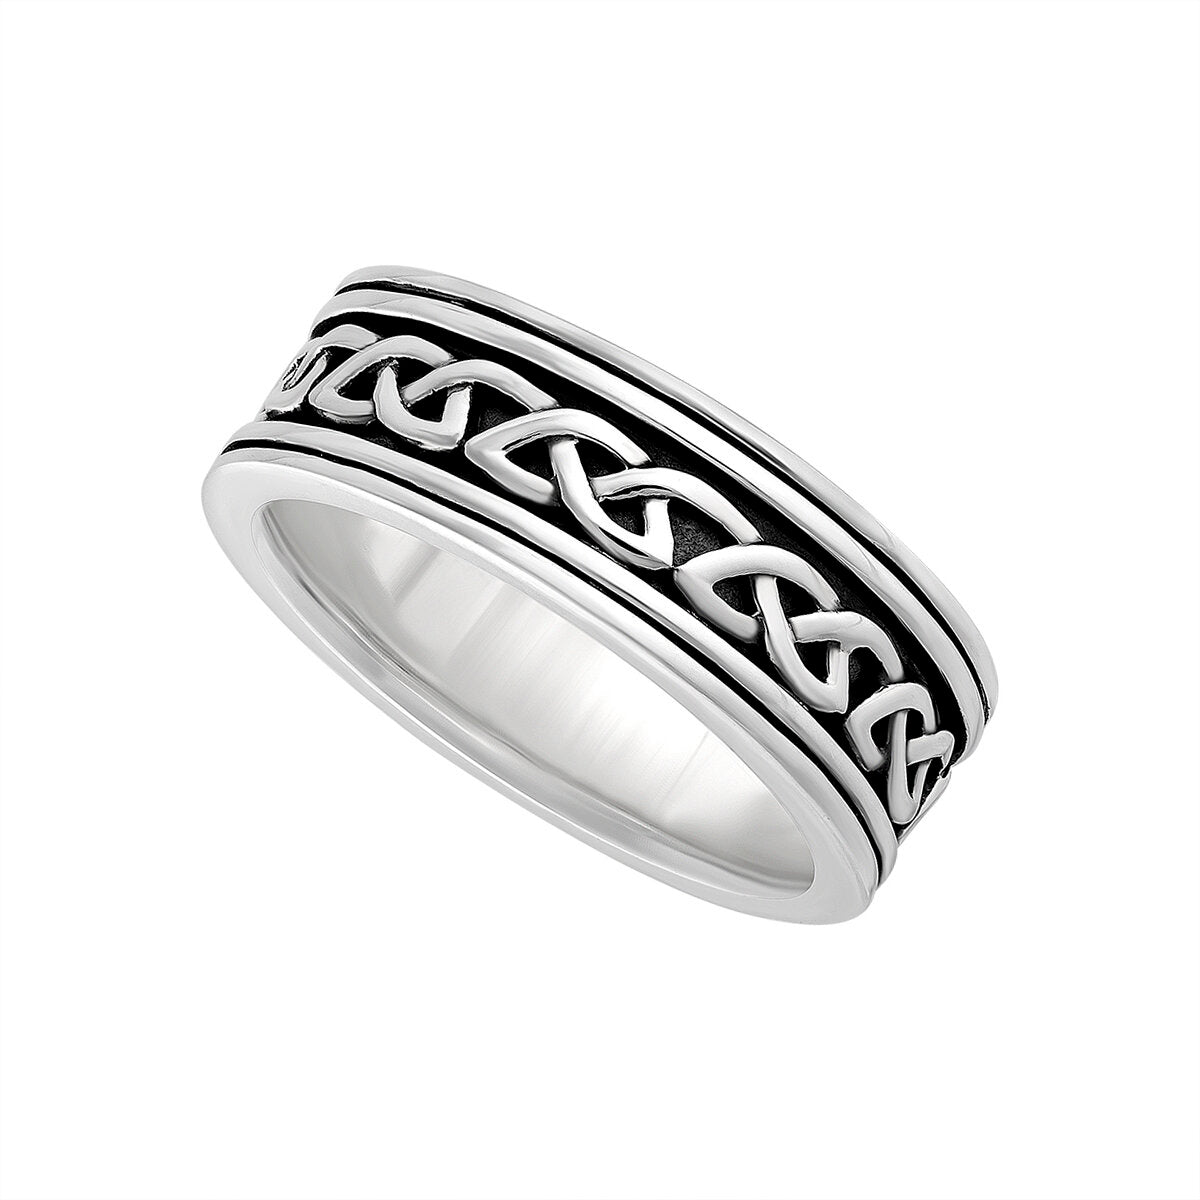 Men's Oxidized Sterling Silver Celtic Knot Band